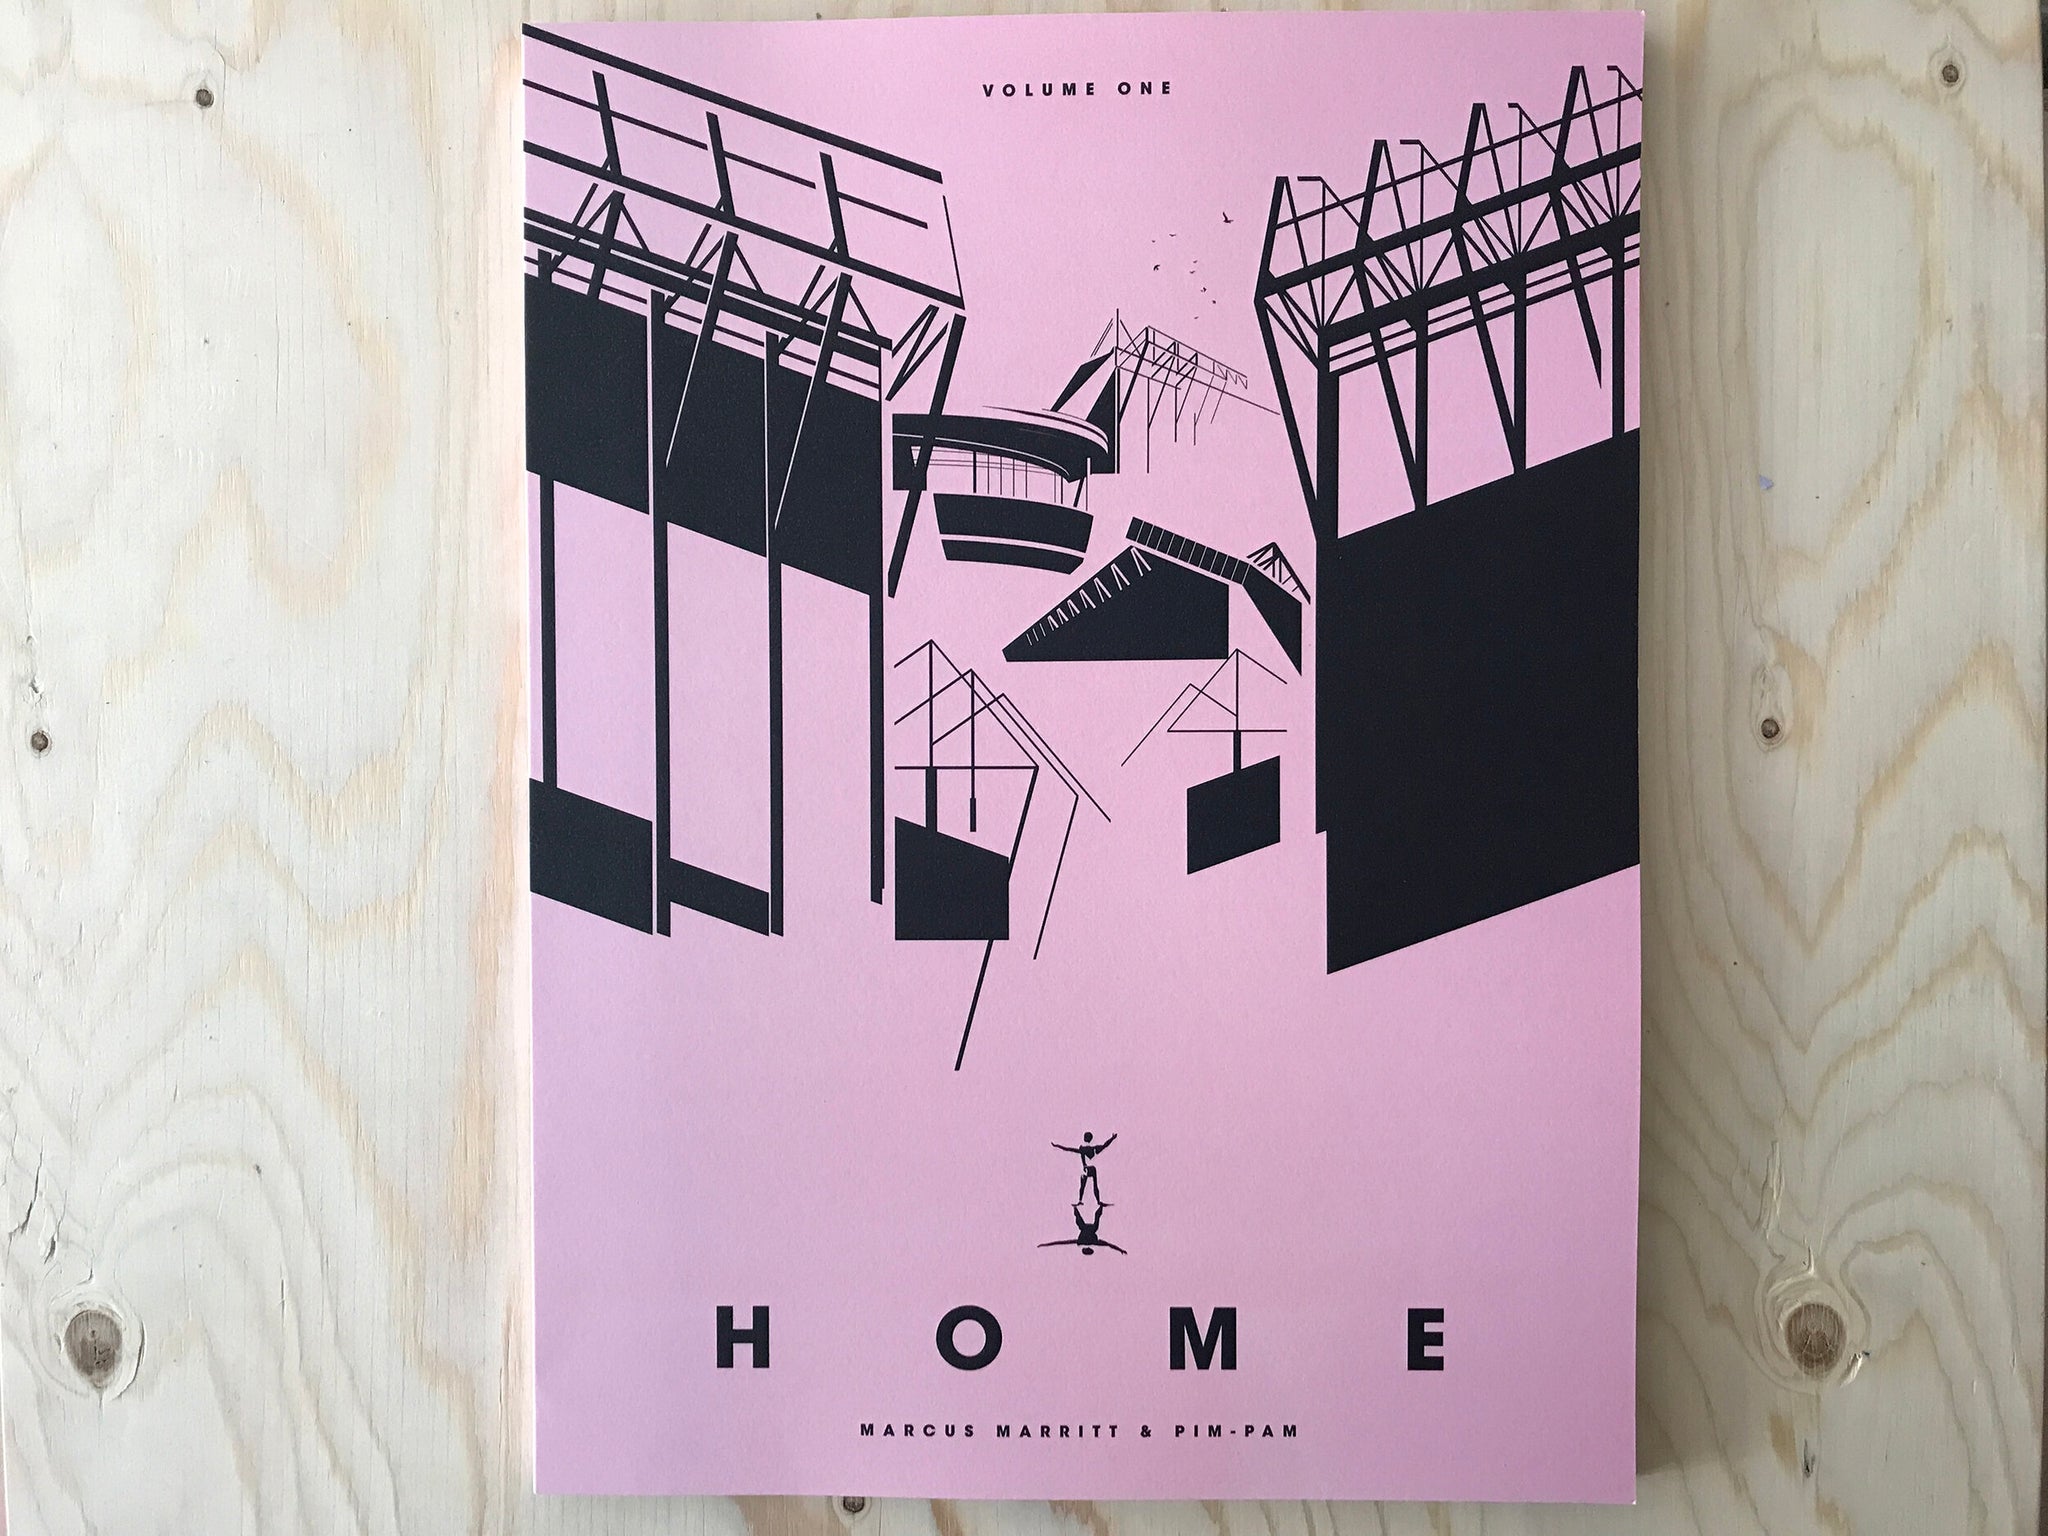 HOME: VOL. 1 by Marcus Marritt and Pim-Pam